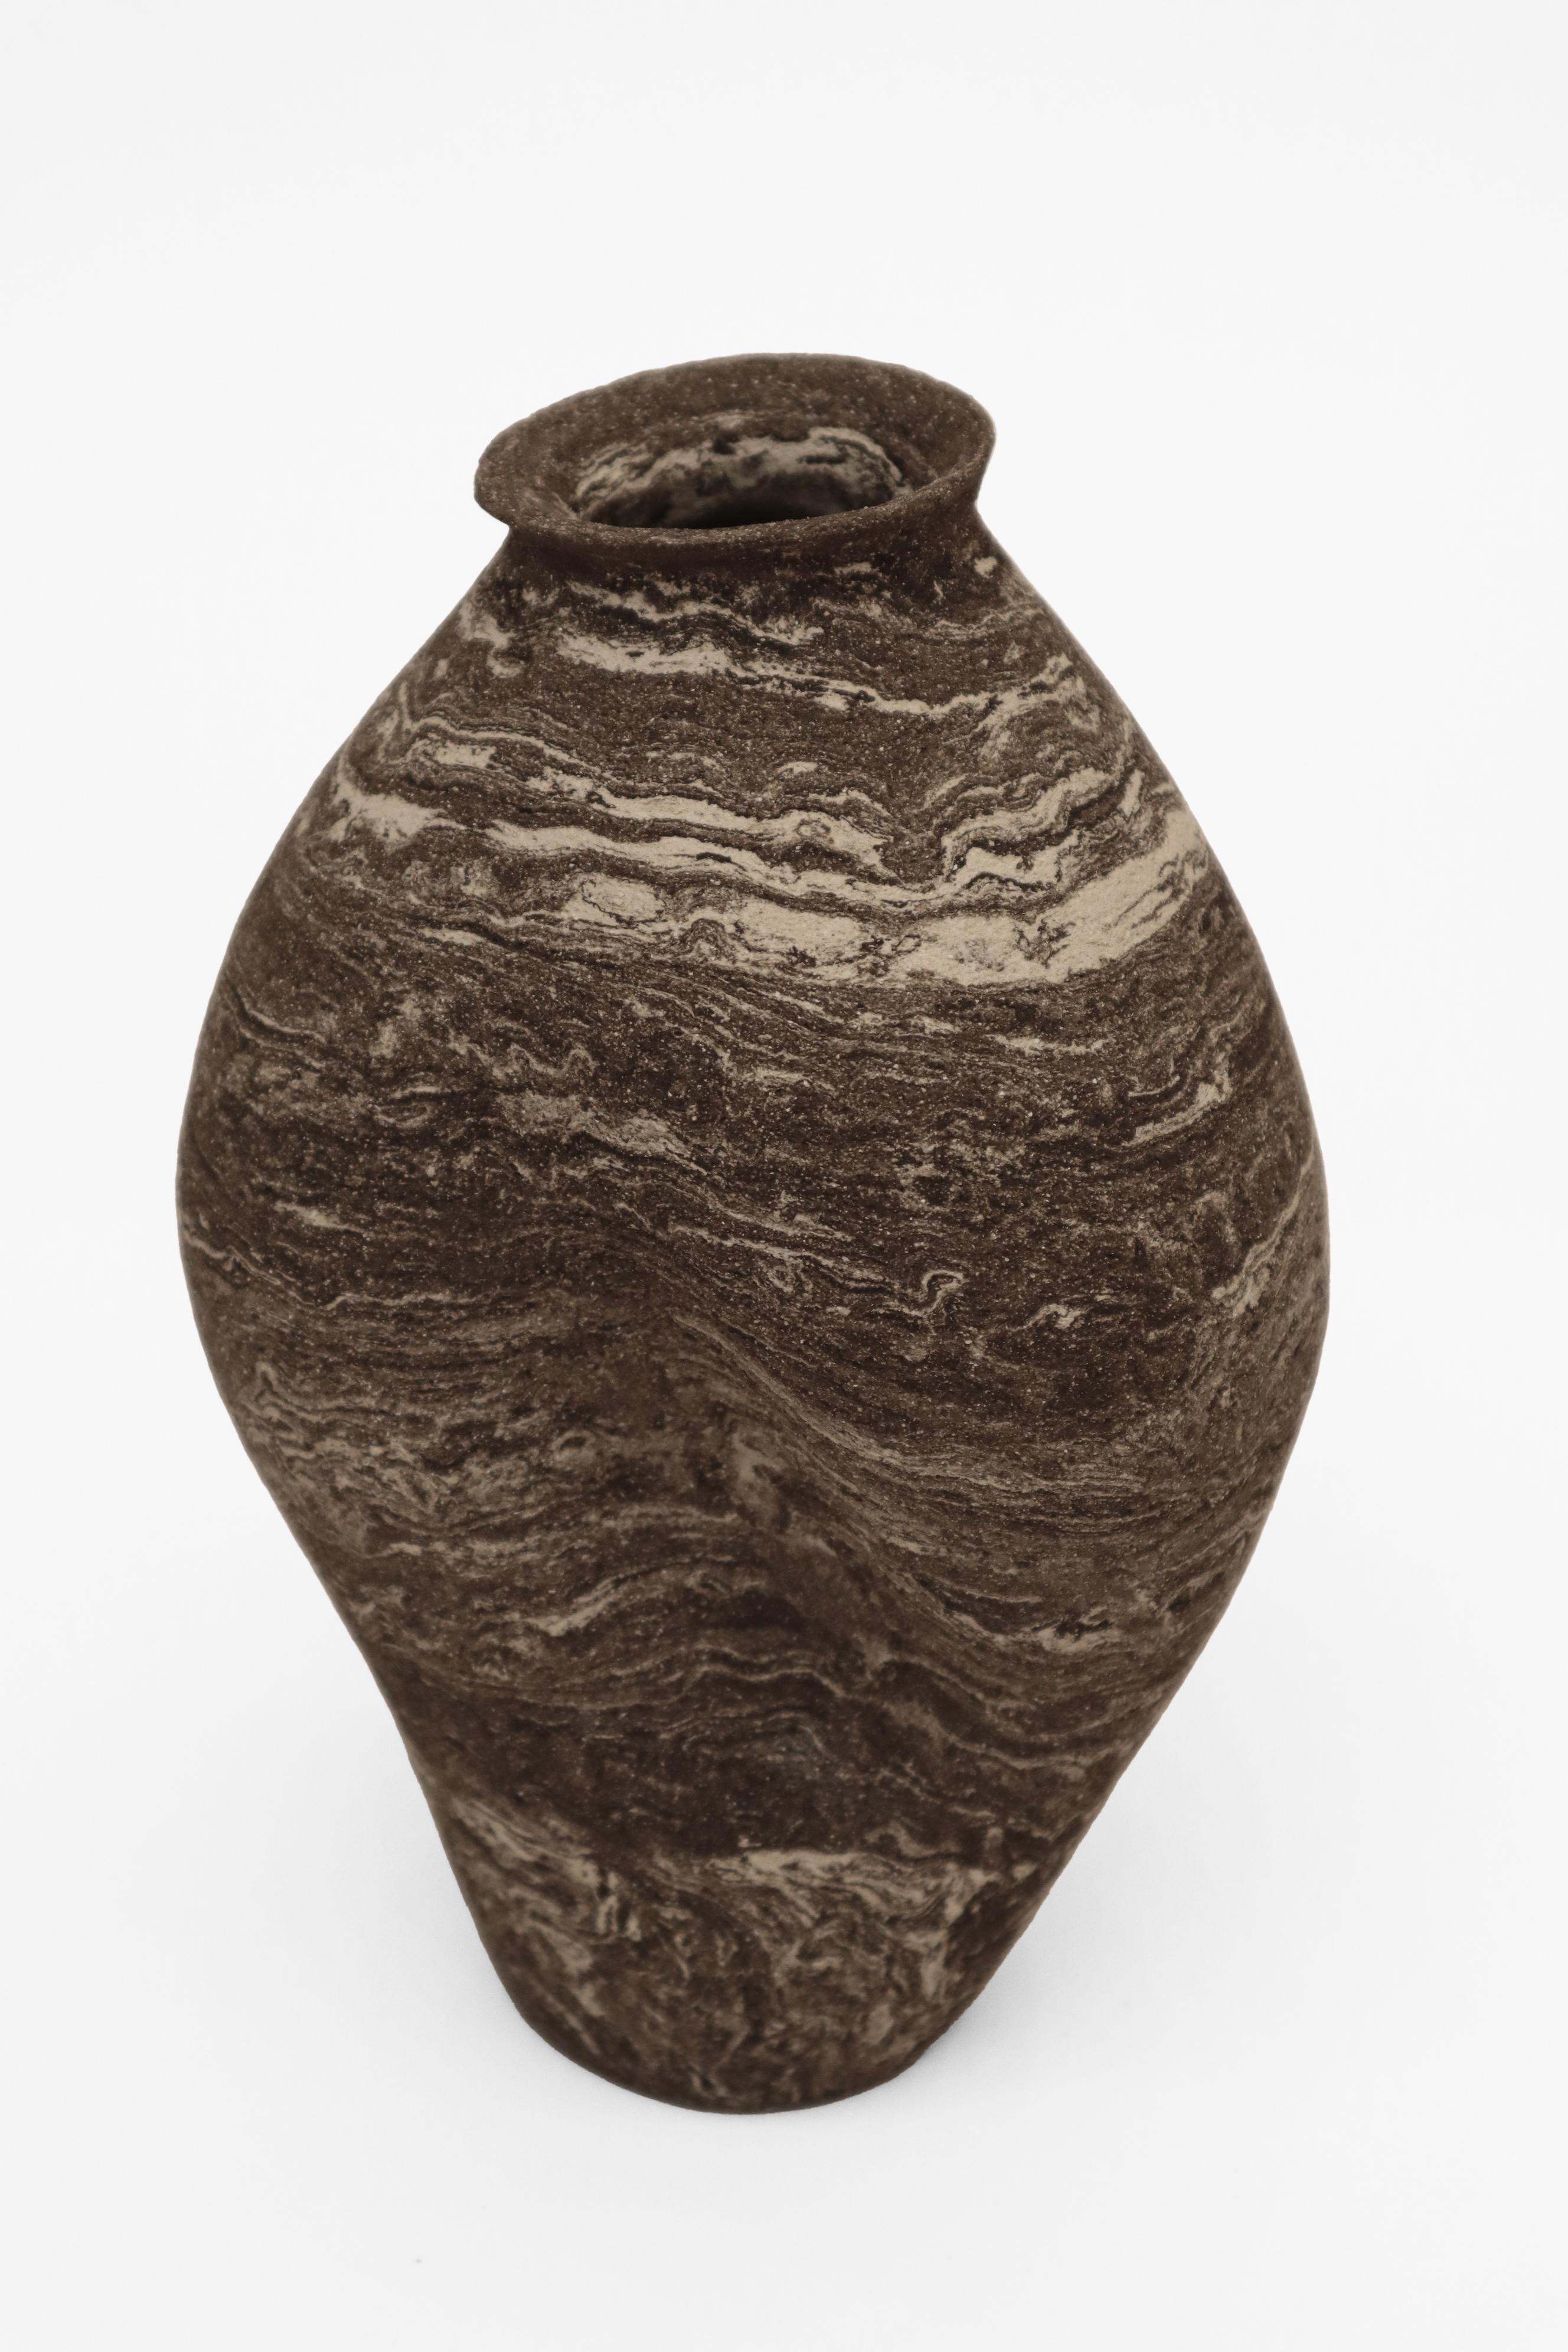 Stomata 1 vase by Anna Karountzou
Dimensions: W 11 x D 10.5 x H 24 cm
Materials: mixed black and white stoneware clay, clear glaze inside, fired at 1240

Born and based in Athens, Greece, with a background in conservation of works of art and